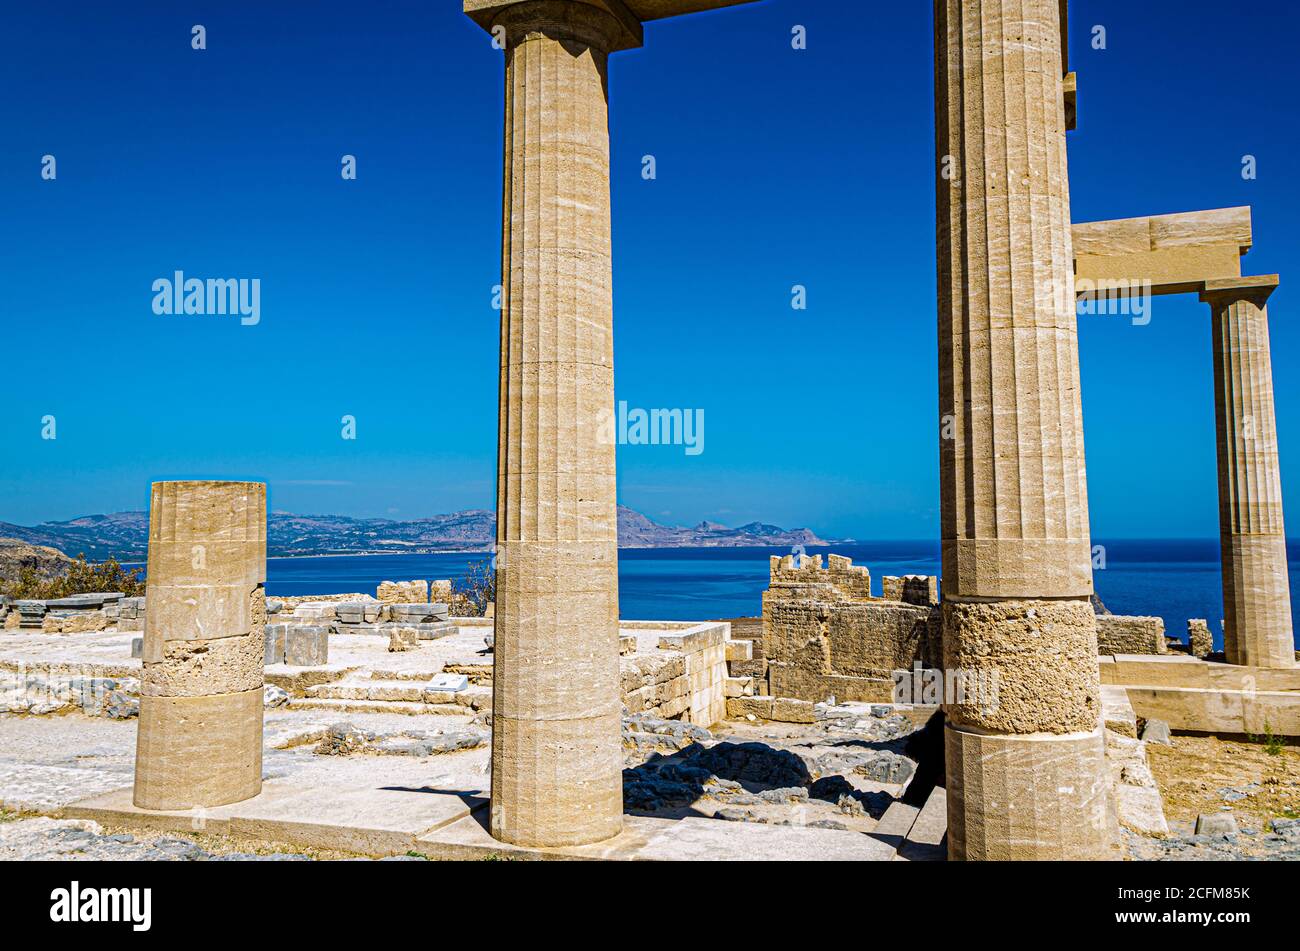 Ruins of the acropolis of the city of Lindos on the island of Rhodes and the Aegean Sea in the background. Greece Stock Photo